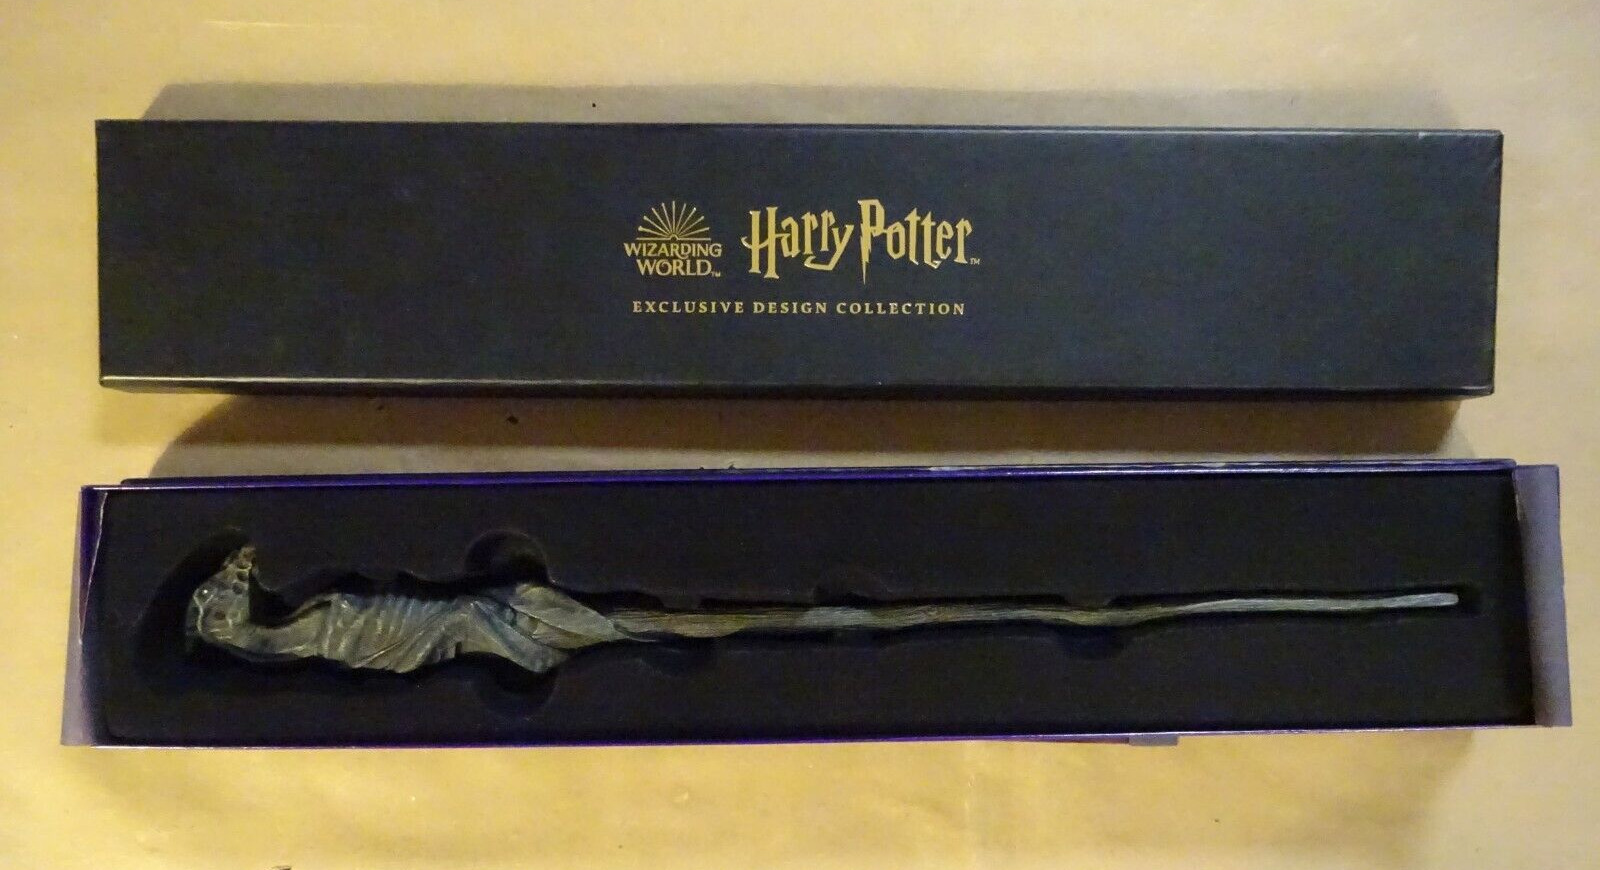 Authentic Wizarding World of Harry Potter - The Thestral Wand (s20)